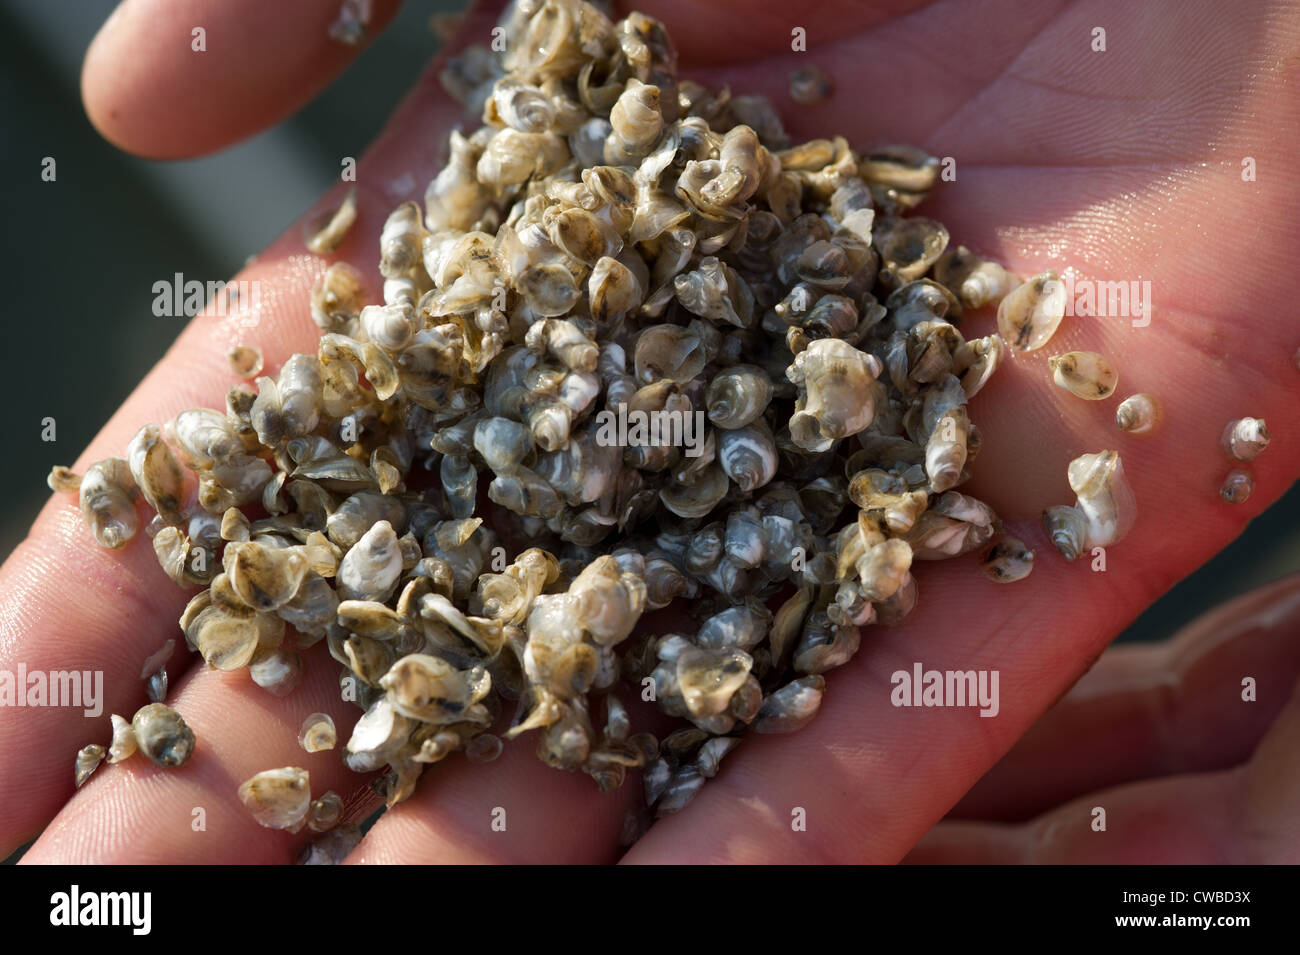 Baby oyster shells in a hand, Shooting Point Oysters, Bayford VA Stock Photo